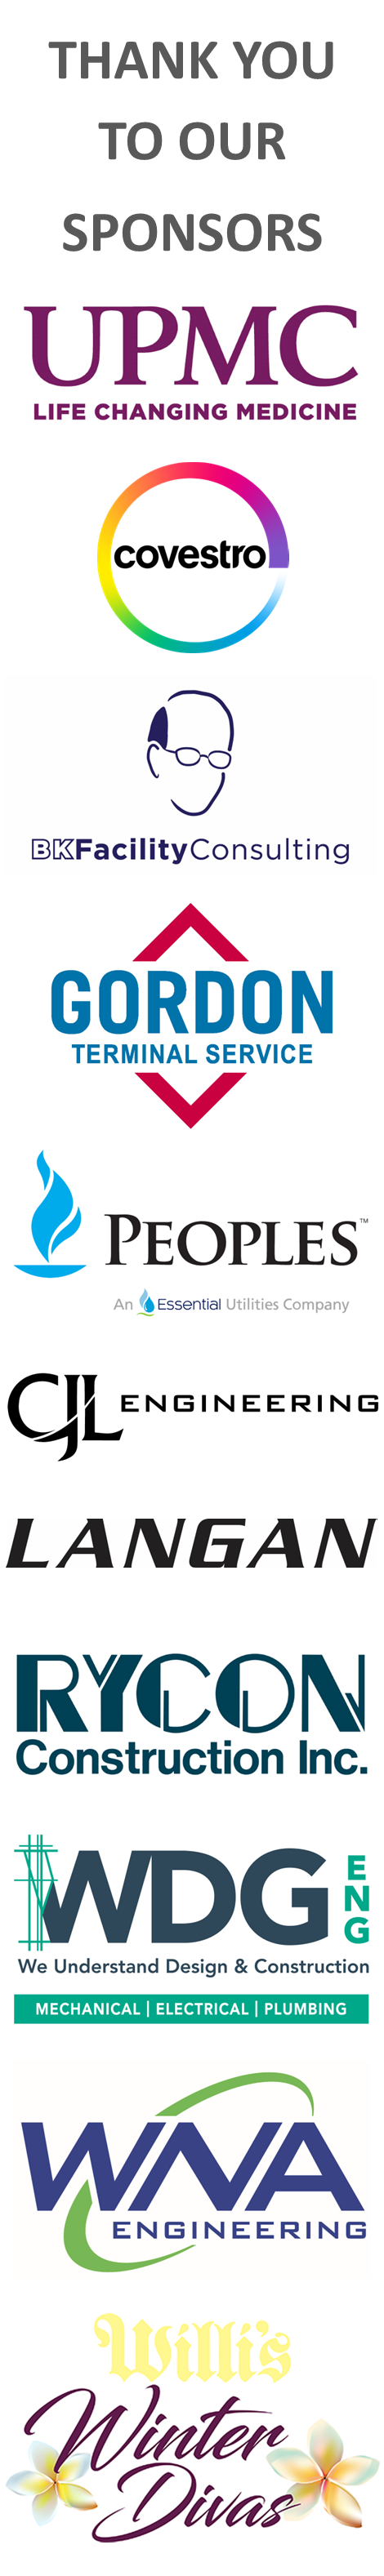 Thank you to our sponsors with logos for UPMC, Covestro, BK Facilities, Gordon Terminal Service, Peoples, CJL Engineering, Langan, WNA Engineering, WDG Engineering, Rycon Construction, and Willis Winter Divas